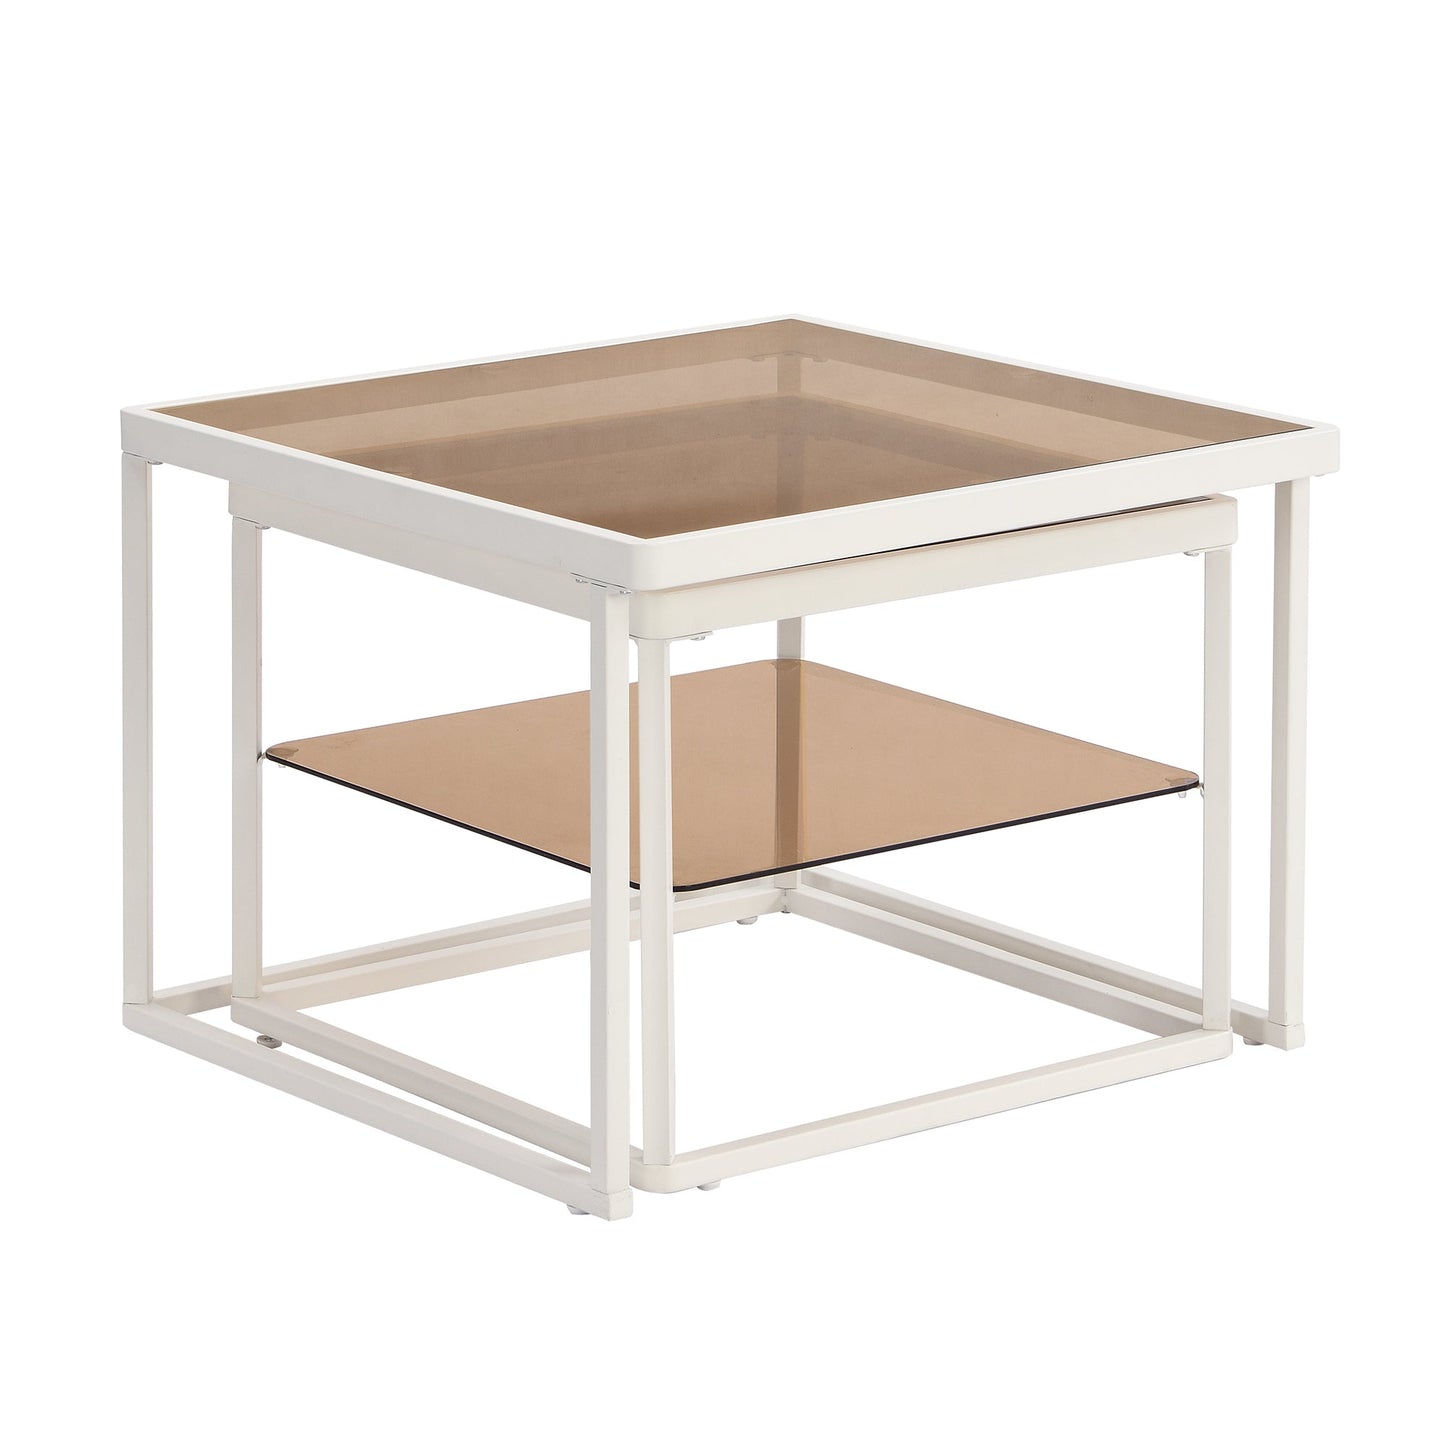 Modern Nested Coffee Table Set with High-low Combination Design, Brown Tempered Glass Cocktail Table with Metal Frame, Length Adjustable 2-Tier Center&End Table for Living Room, White